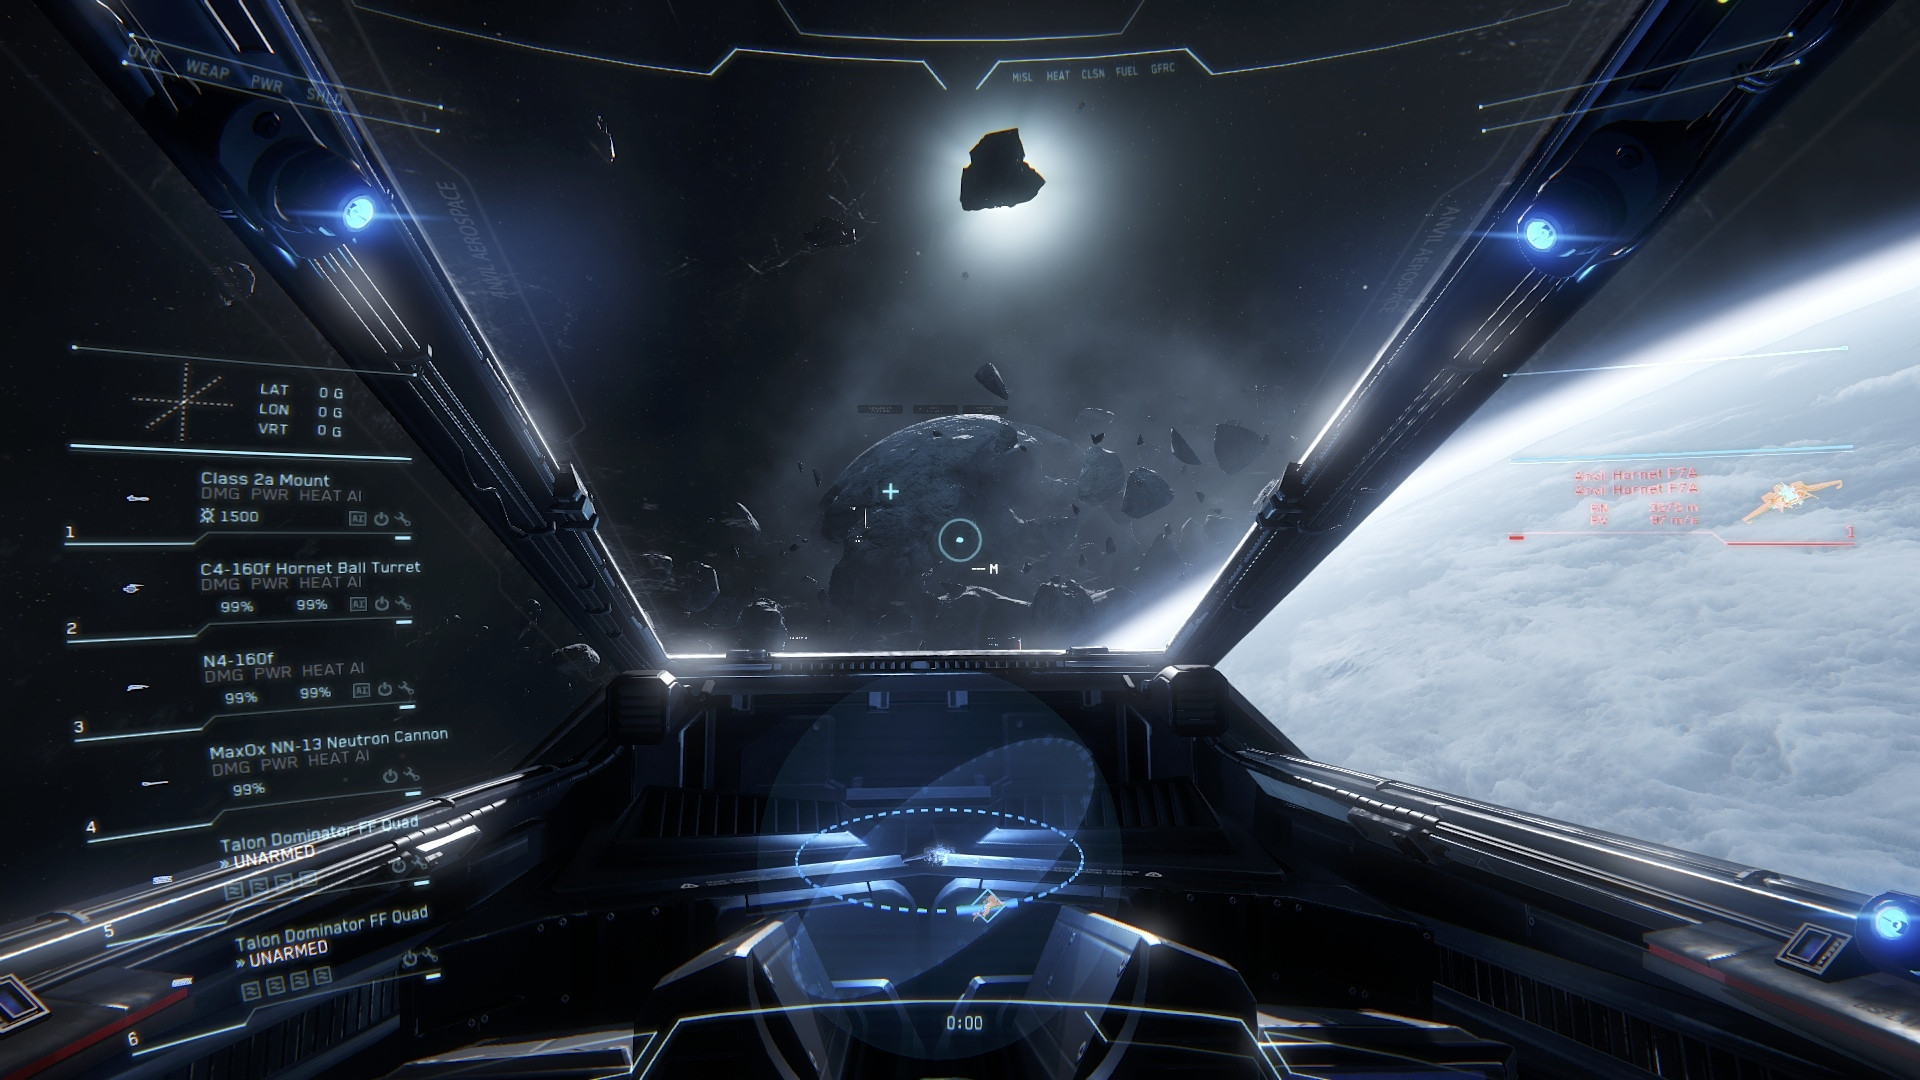 Star Citizen System Requirements